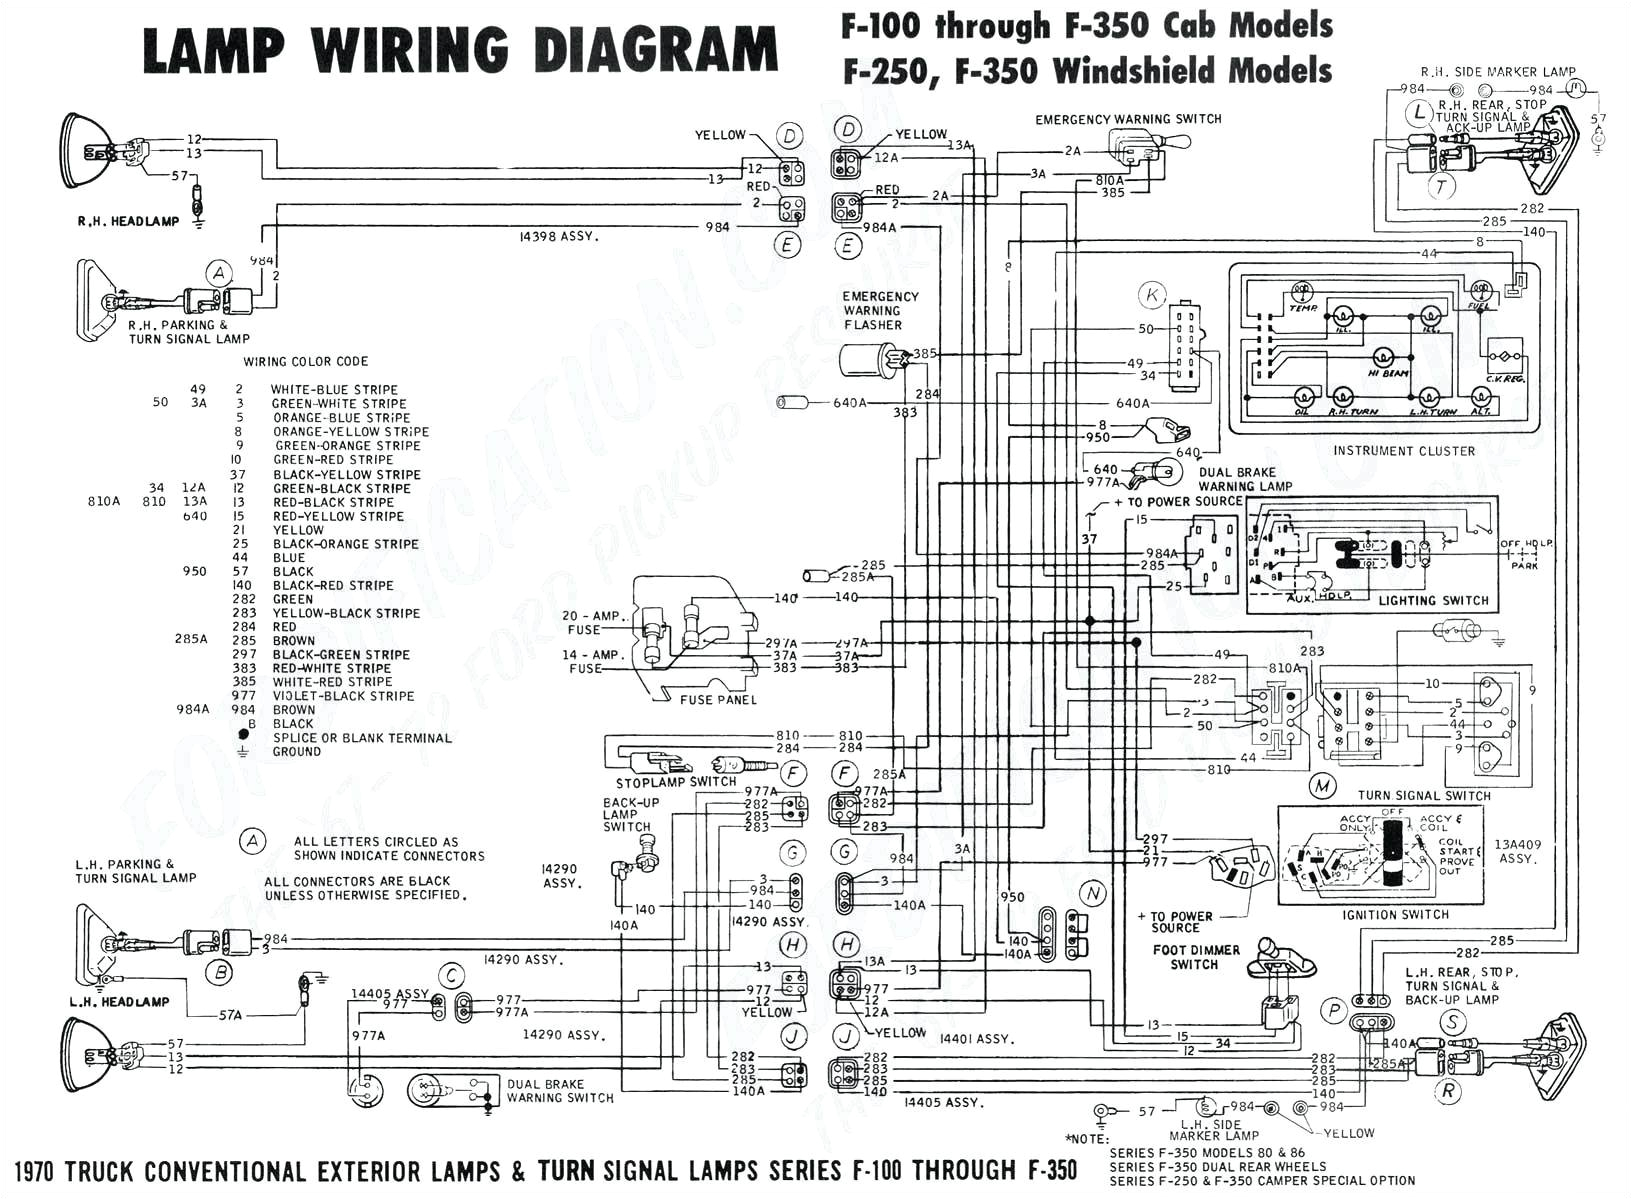 1996 ford contour keyless entry wiring diagram wiring diagrams mydiagram for 1996 ford e350 motor repalcement